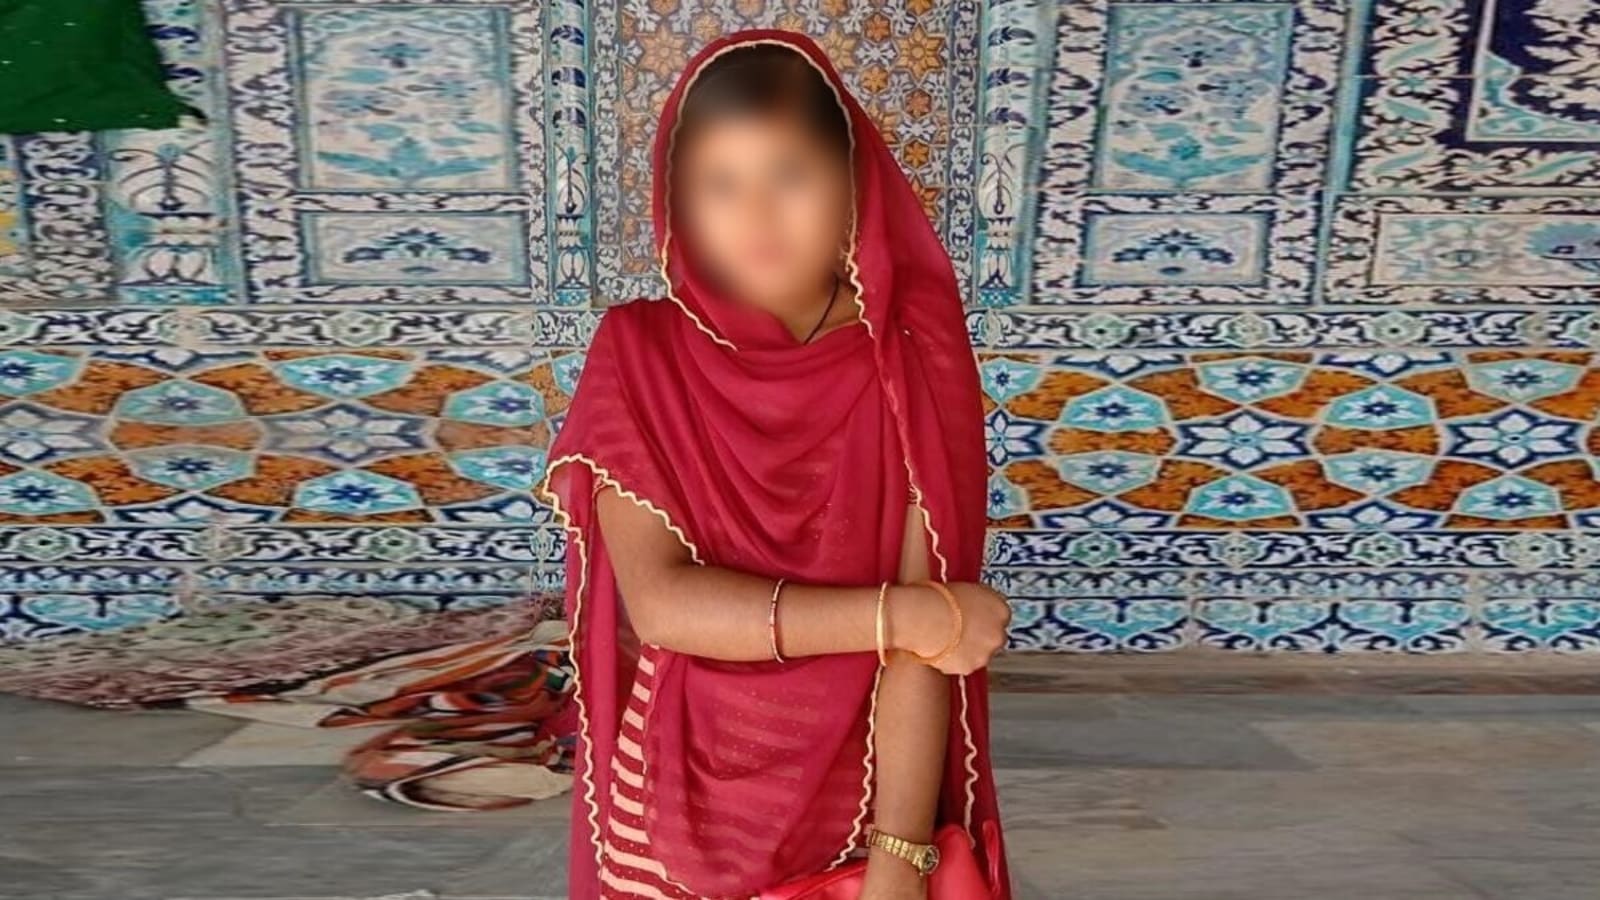 4 Sal Ki Bachi Xxx - Hindu girl abducted in Pakistan's Sindh, fourth incident in 15 days | World  News - Hindustan Times